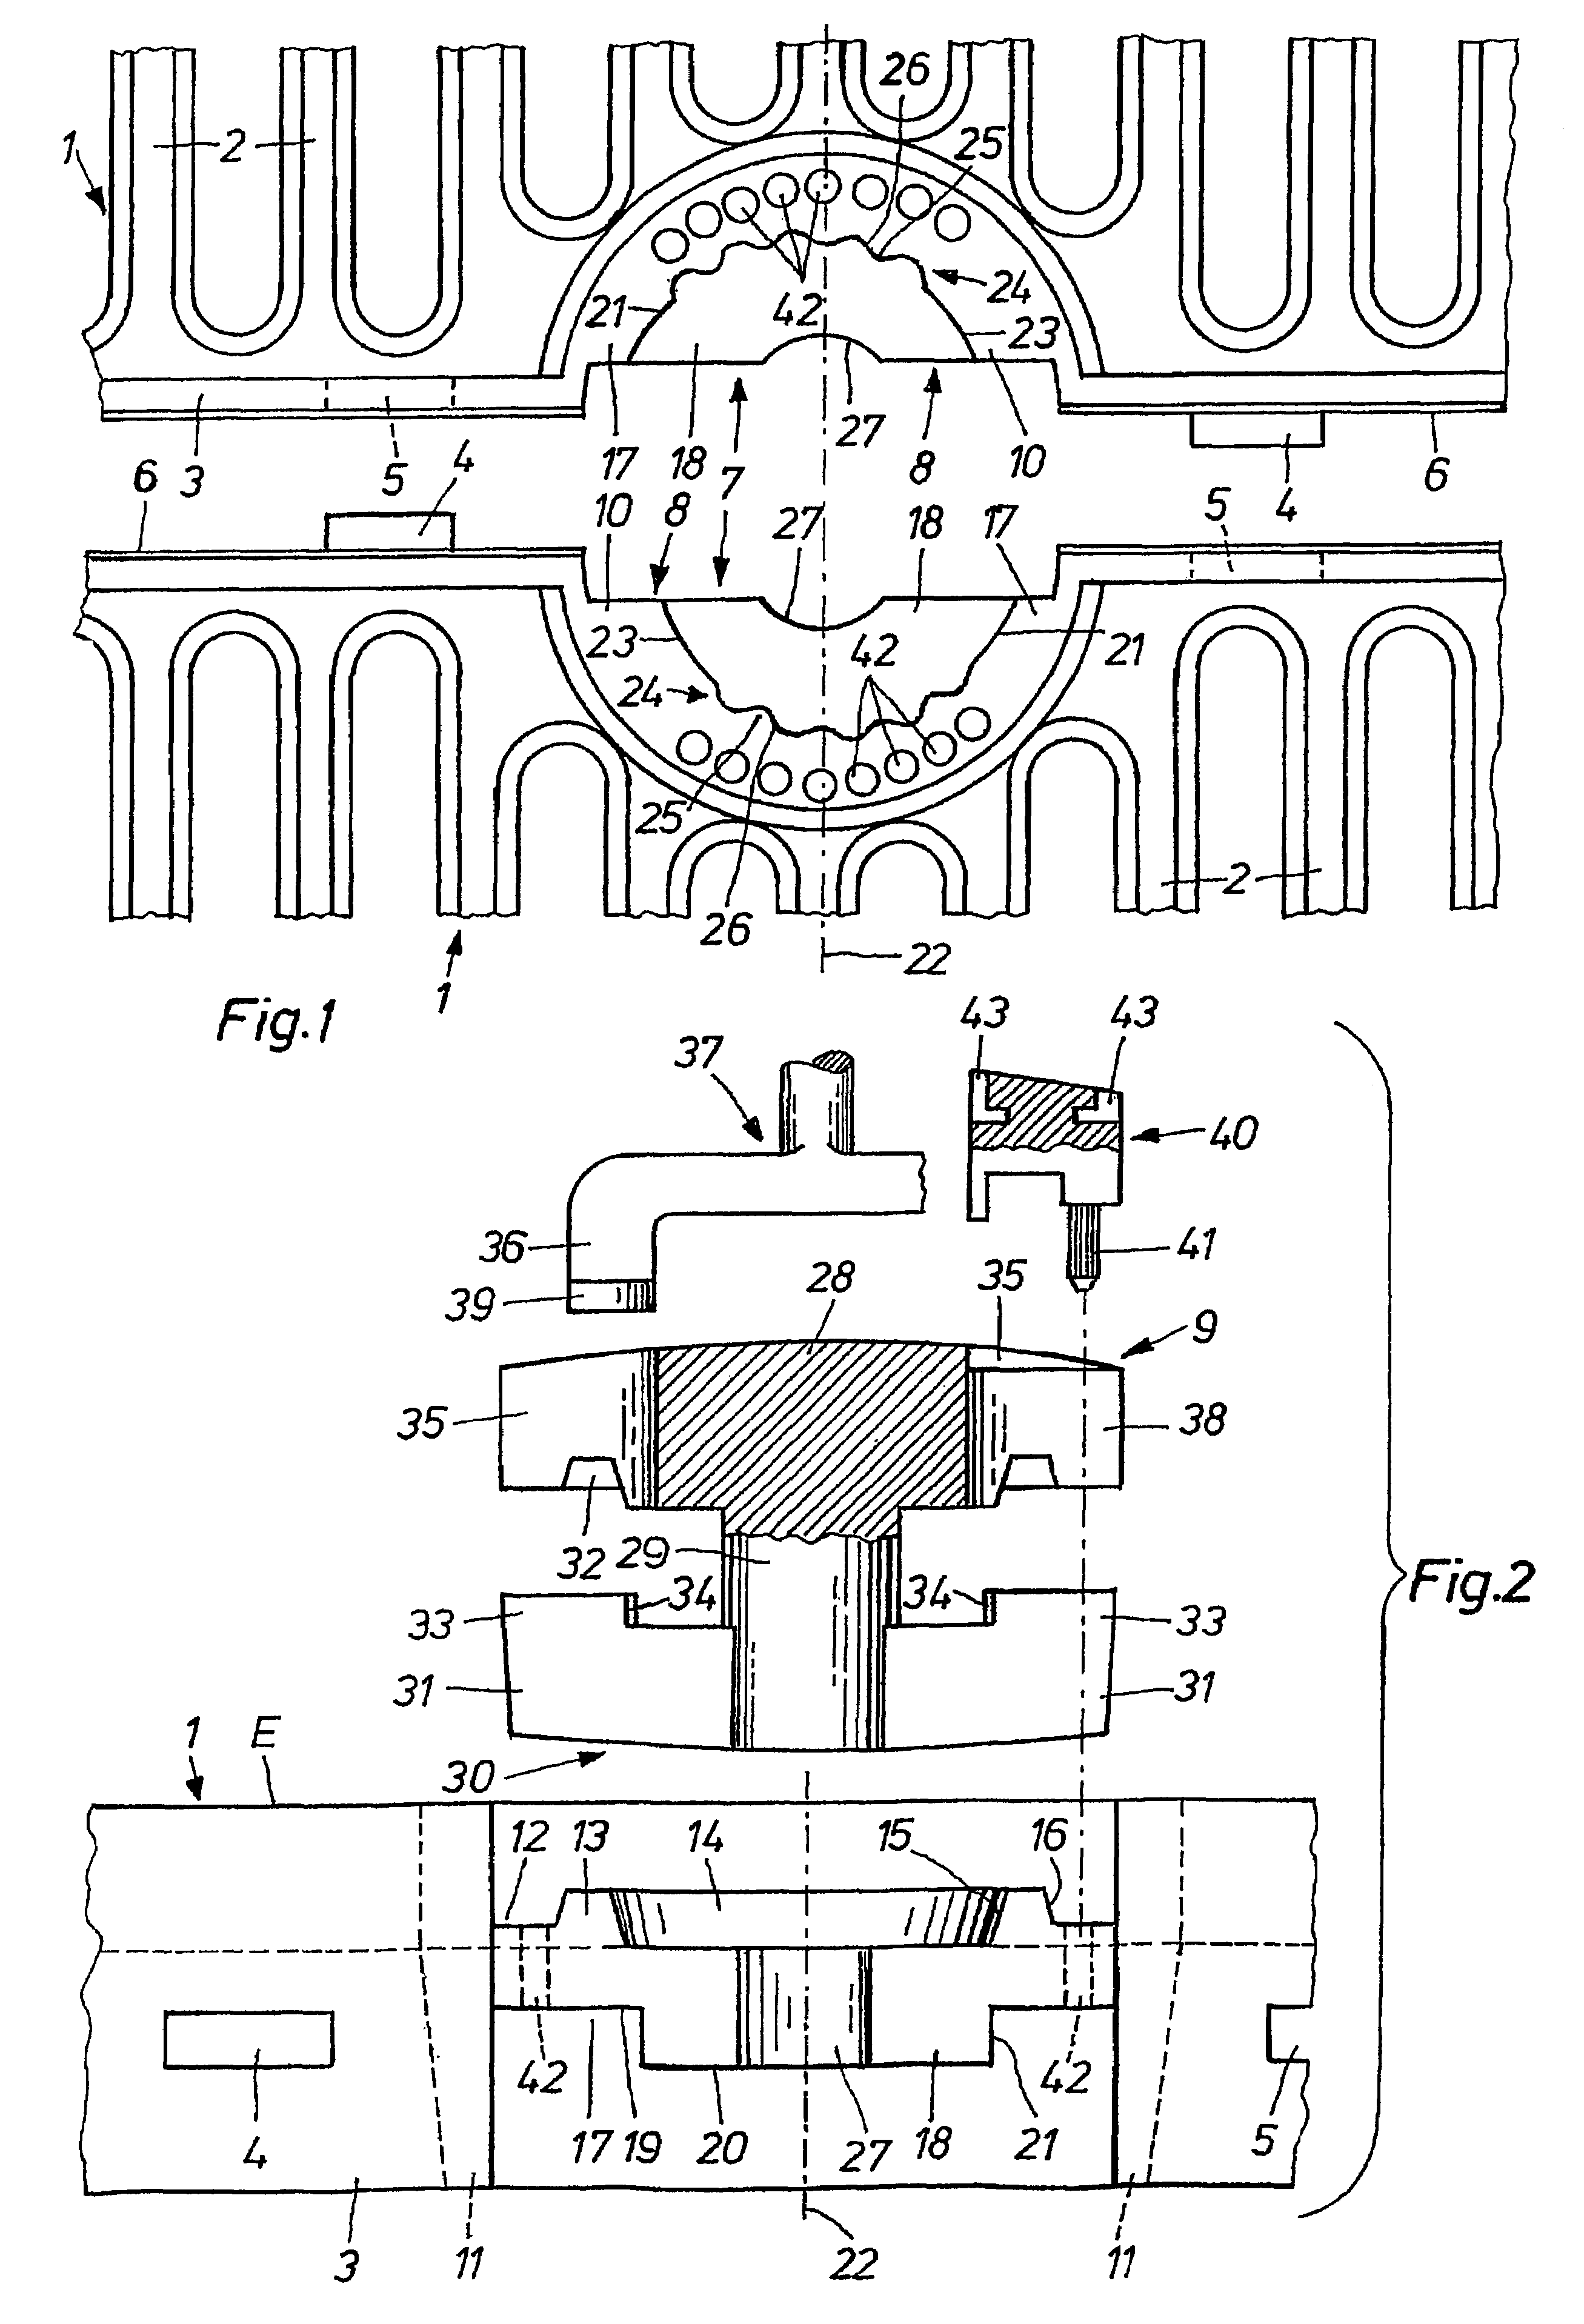 Tree grille system